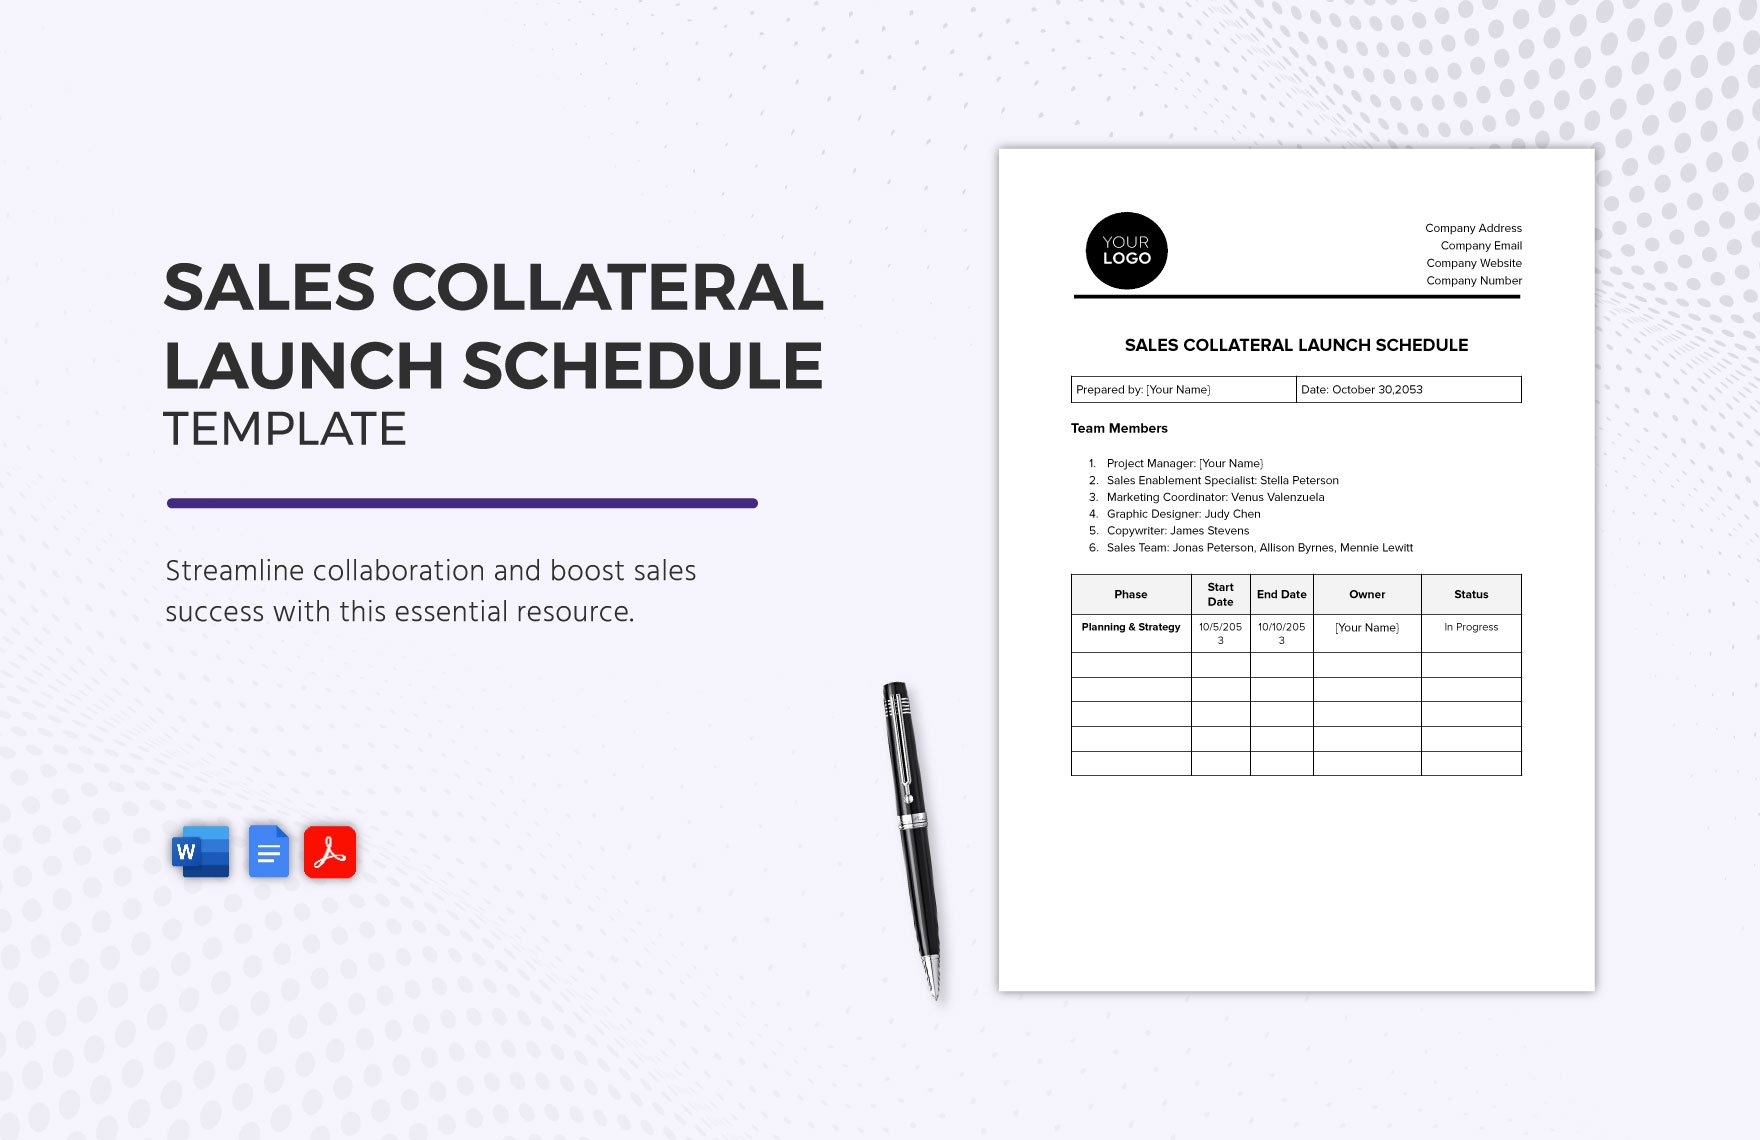 Sales Collateral Launch Schedule Template